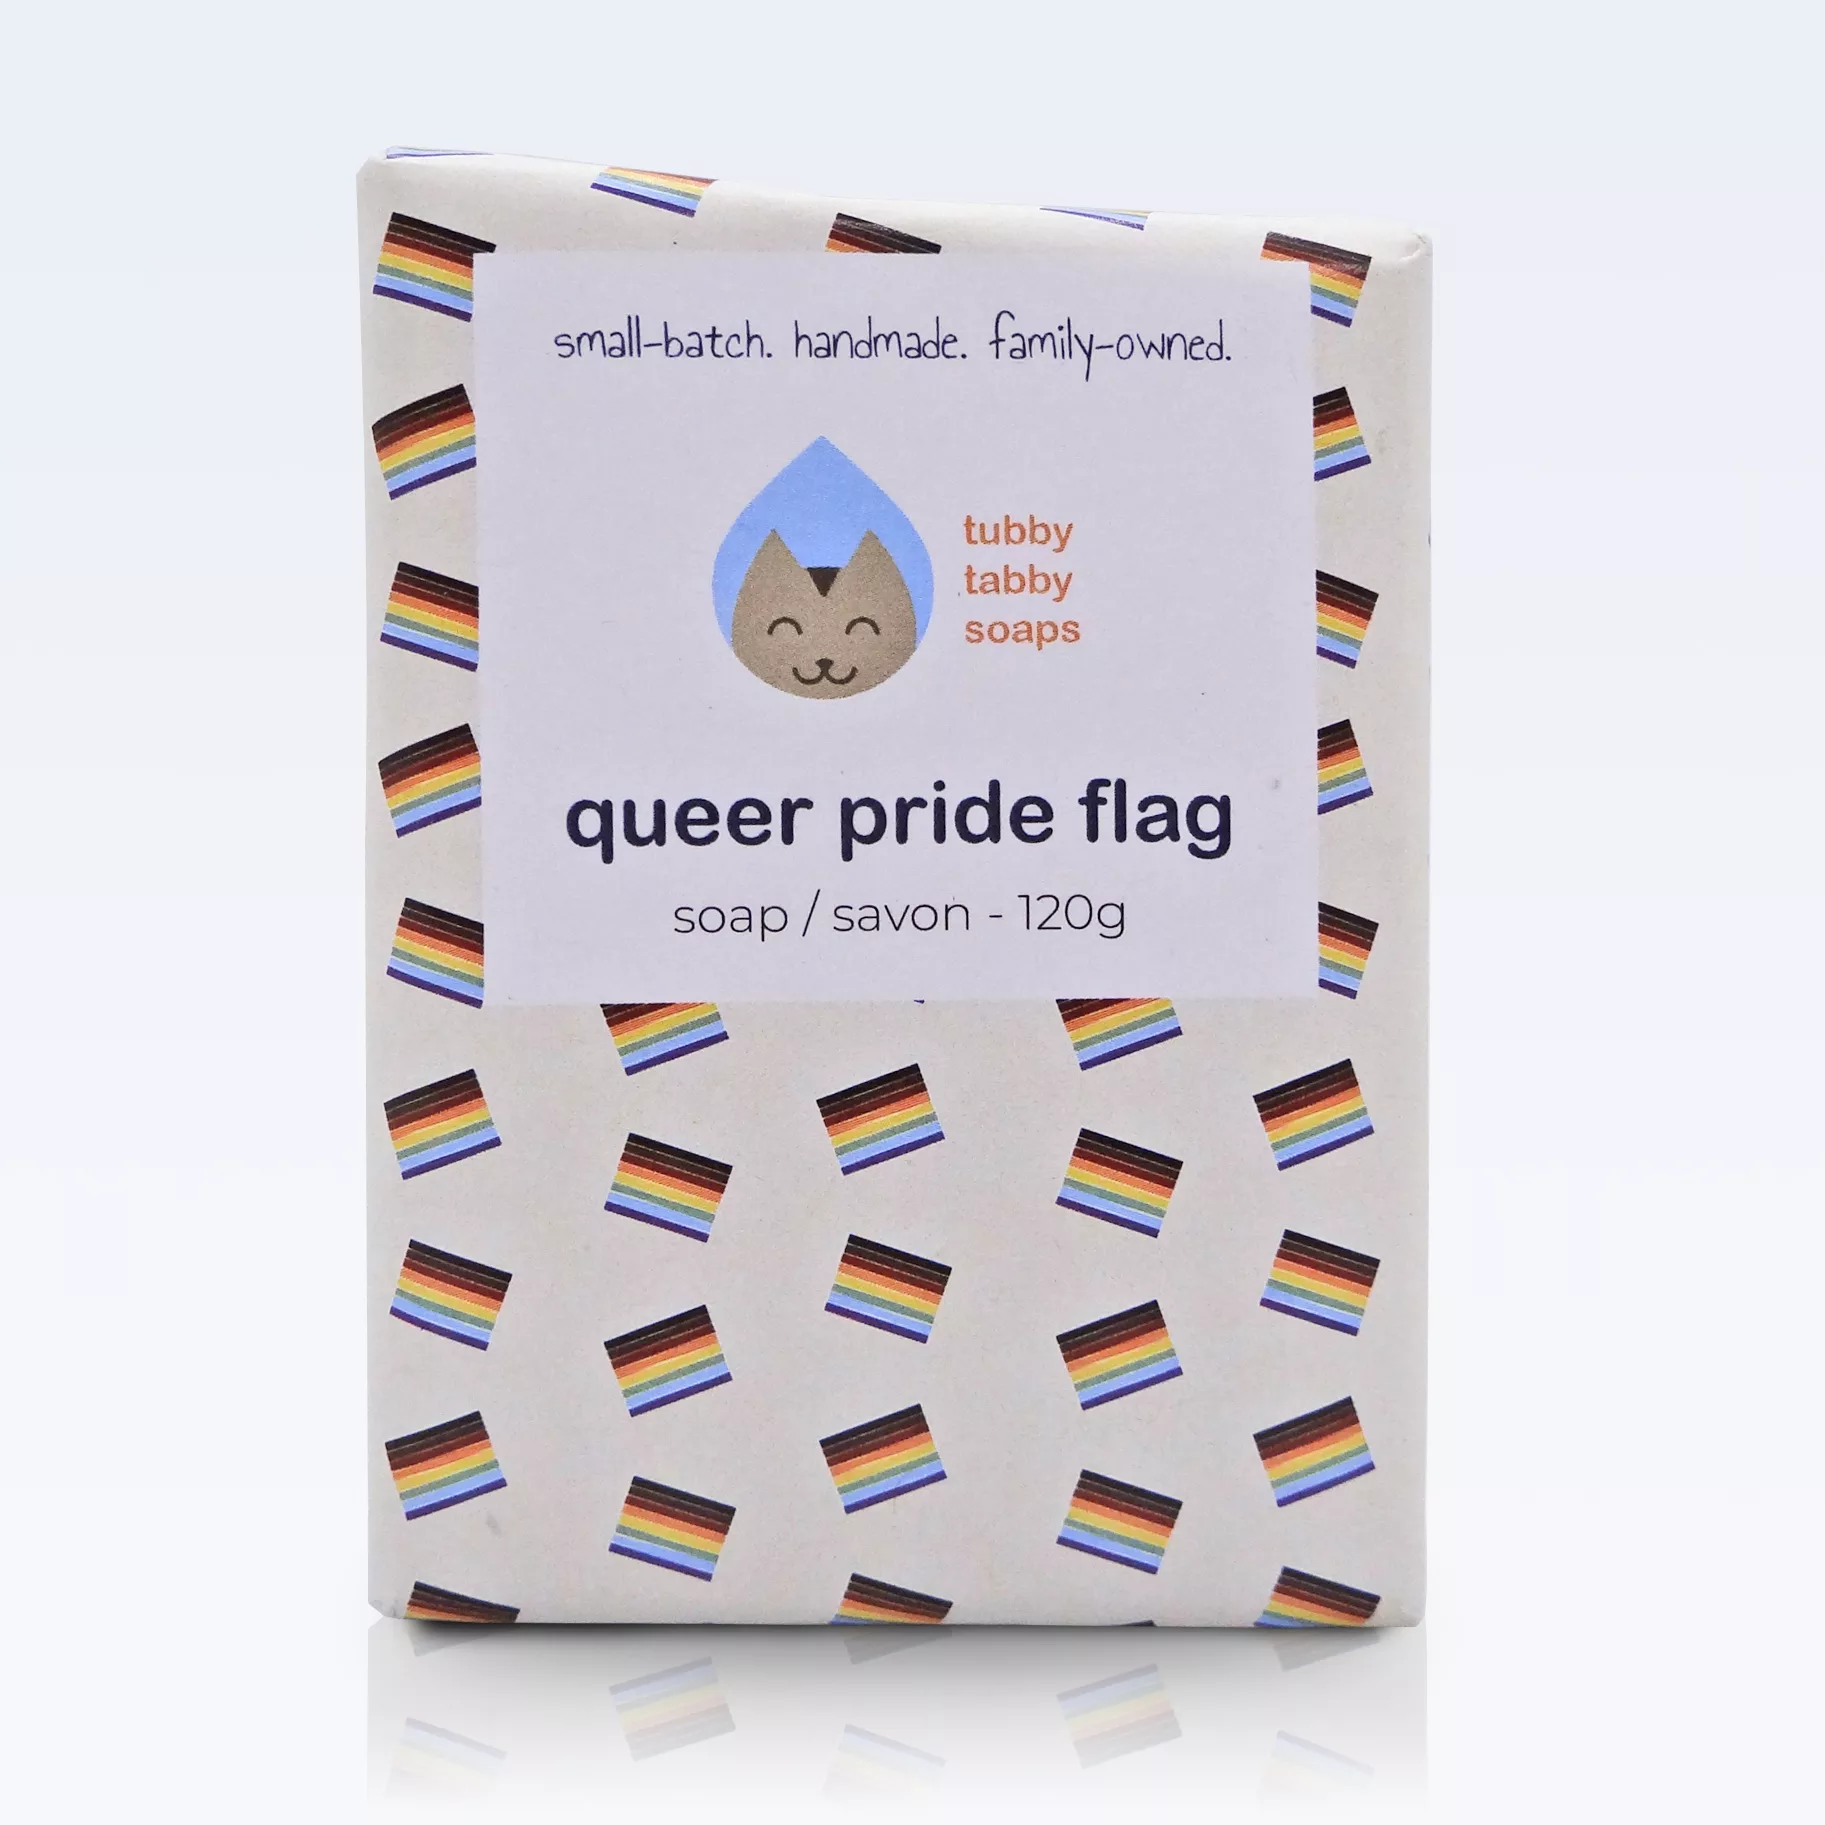 Queer Pride Flag handmade soap by Tubby Tabby Soaps (wrapped)